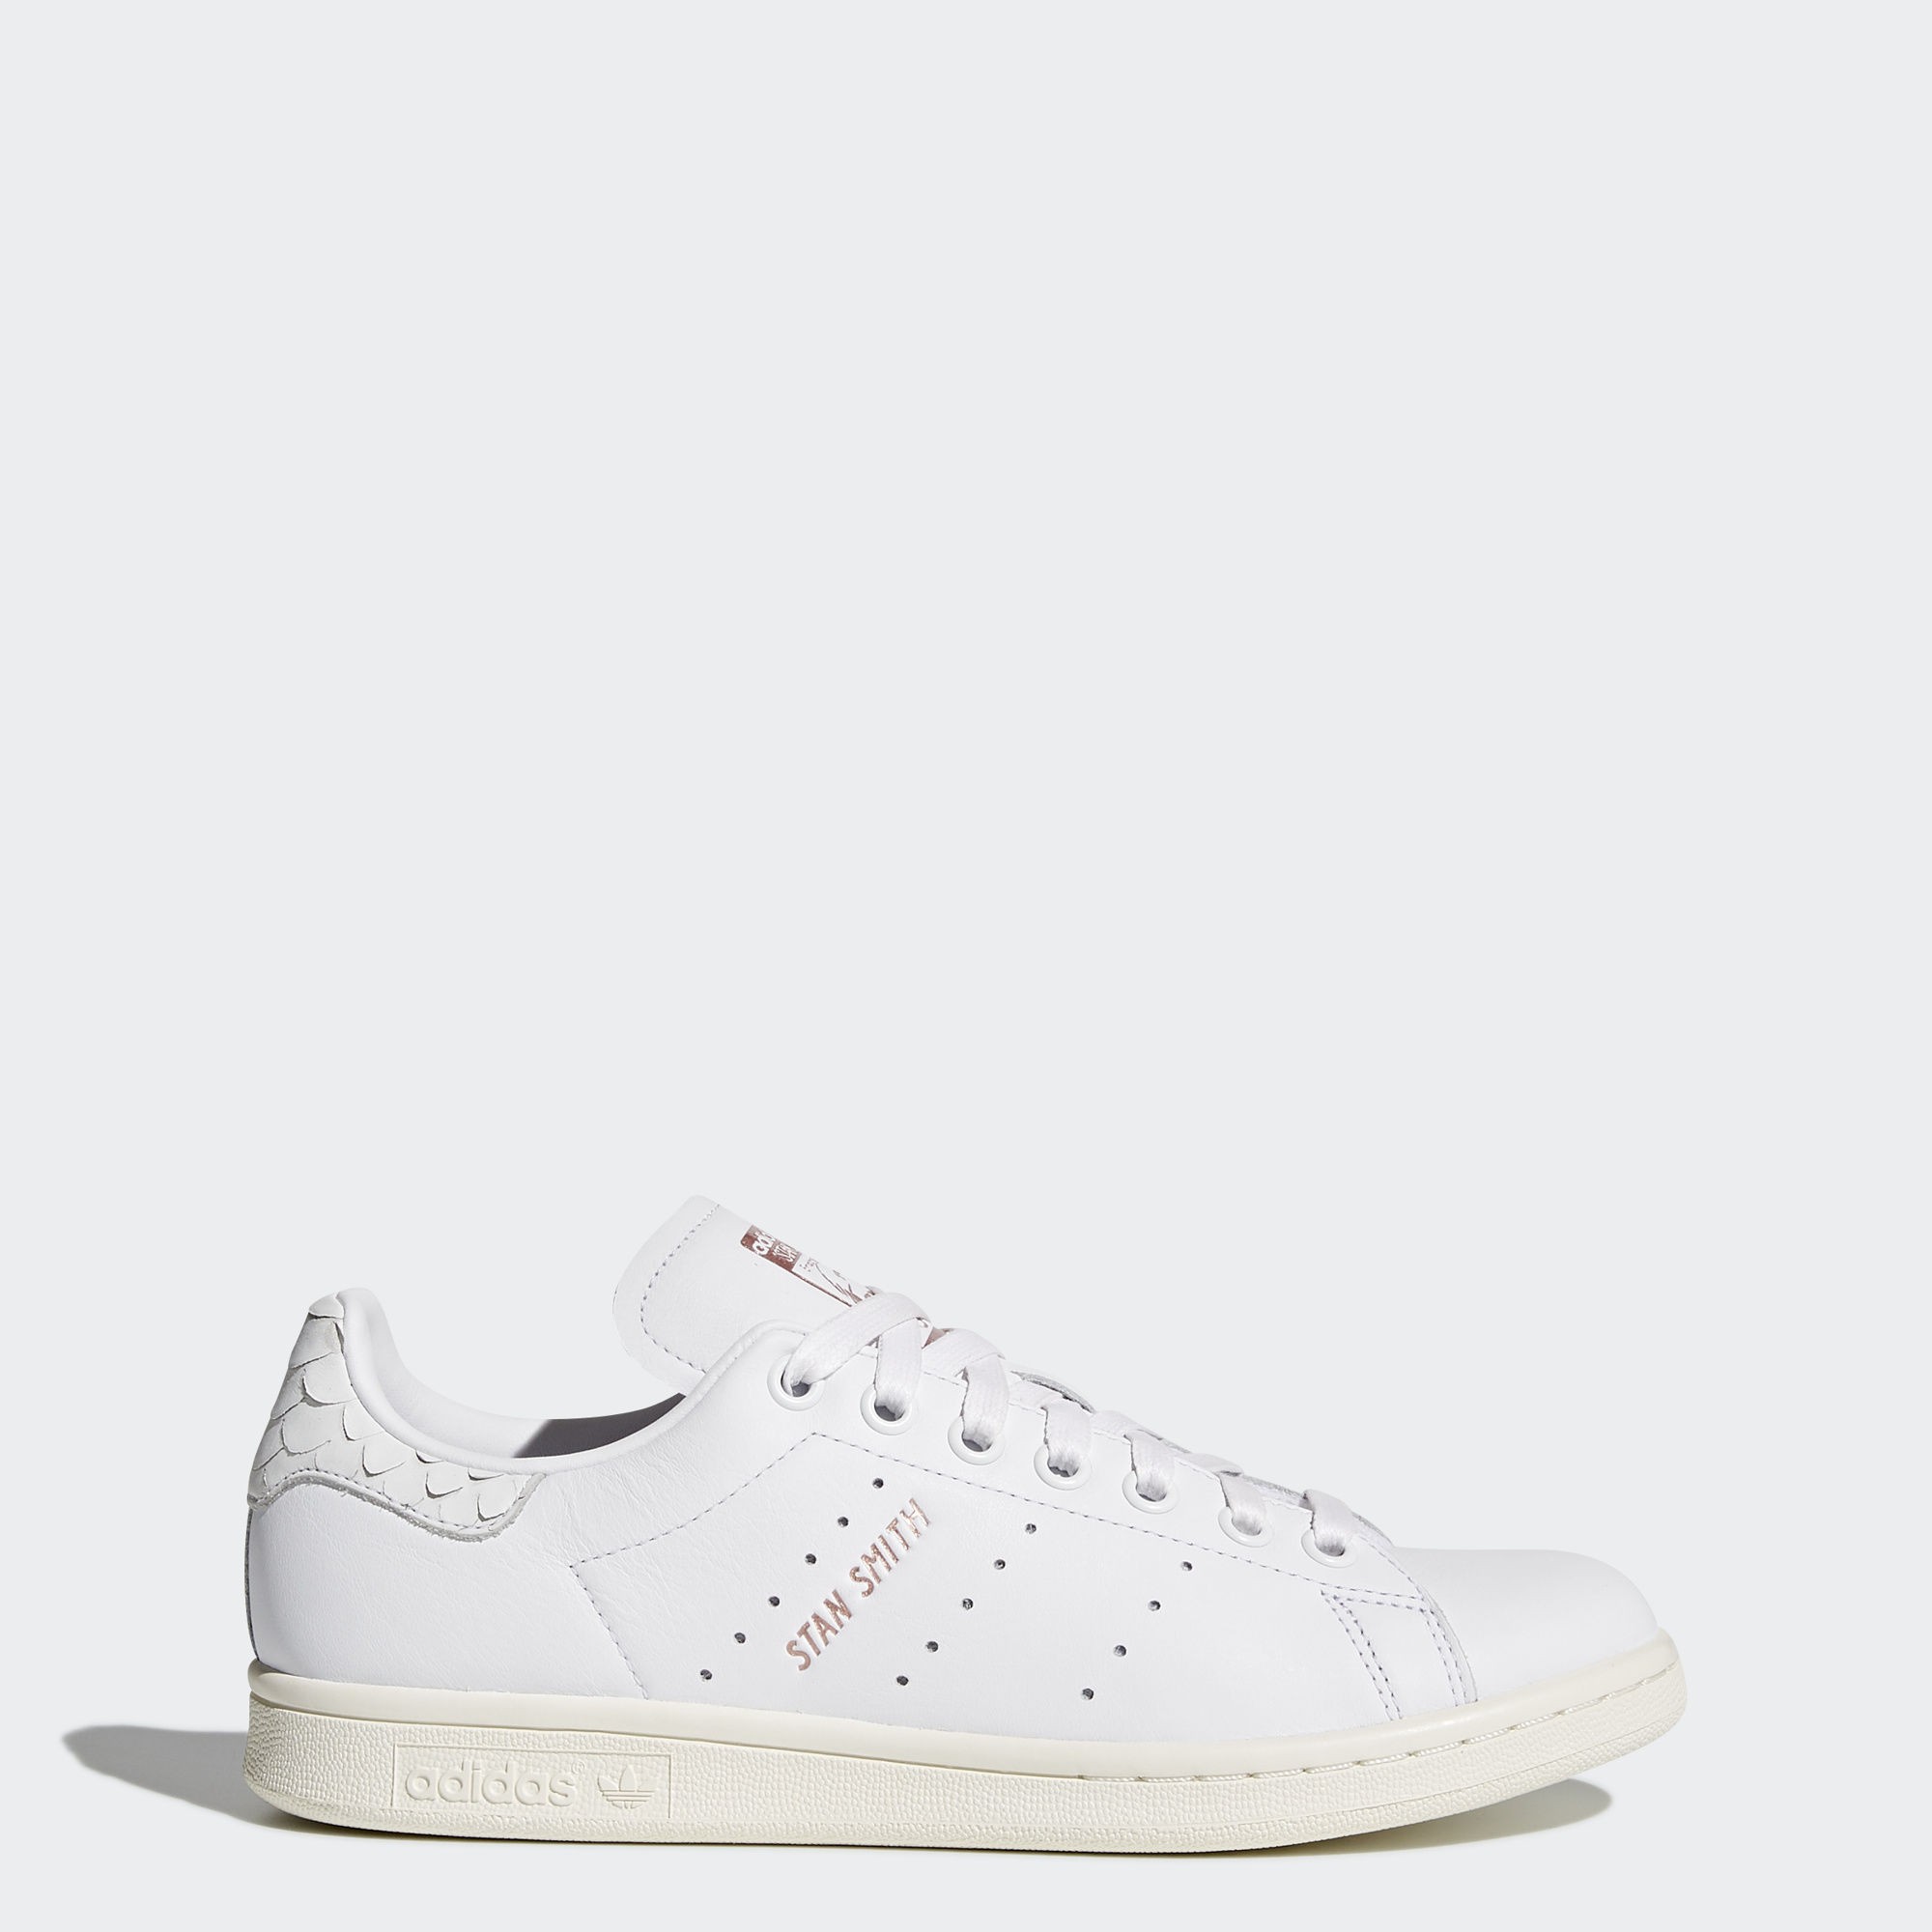 stan smith ecaille - Code promo - www.sophie-passion.fr